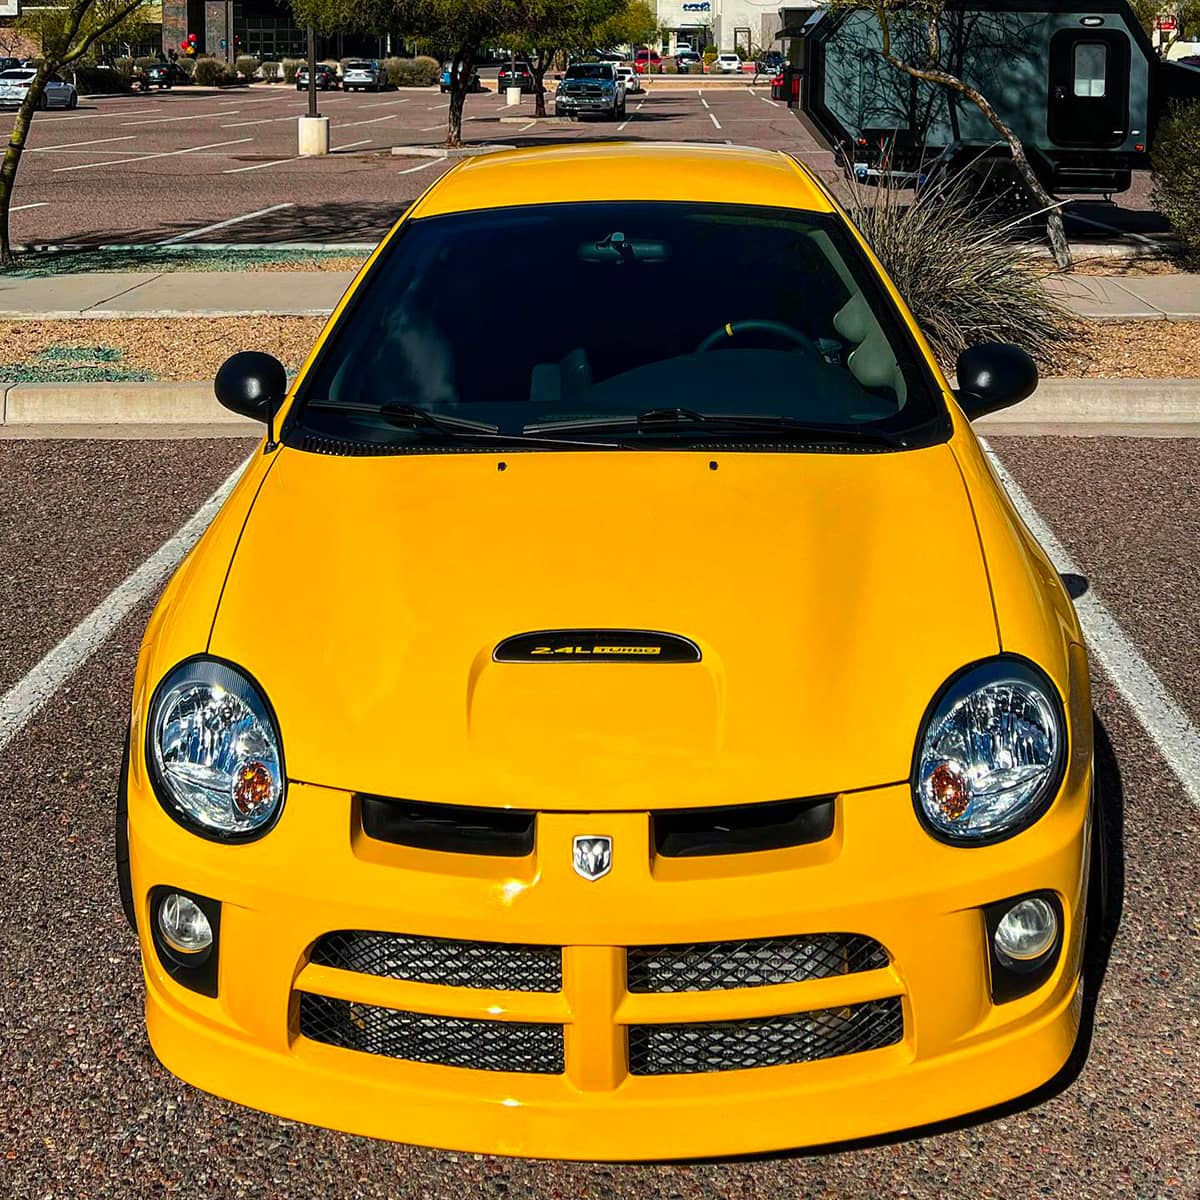 Dodge Neon SRT4 front bumper with intercooler and black grille with hood scoop